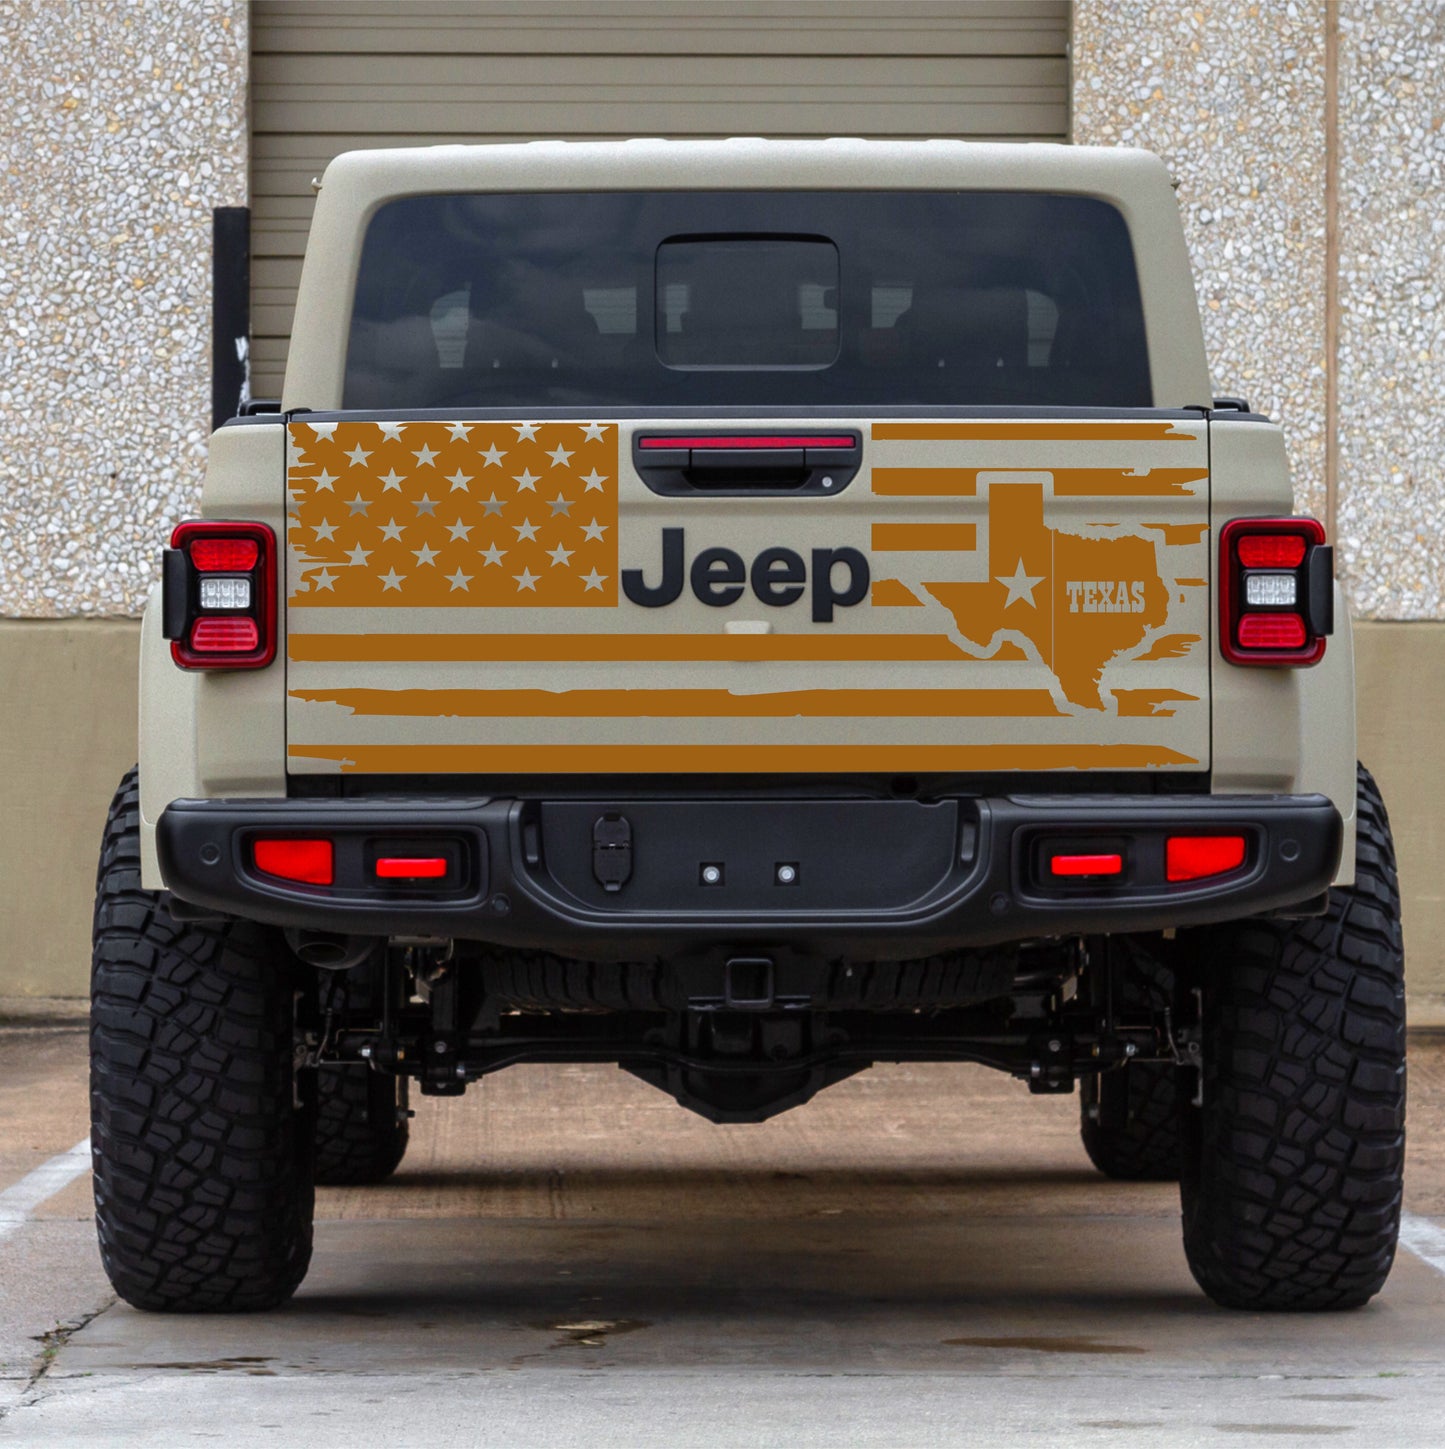 TEXAS FLAG AMERICAN FLAG DECAL STICKERS FOR JEEP GLADIATOR TAILGATE